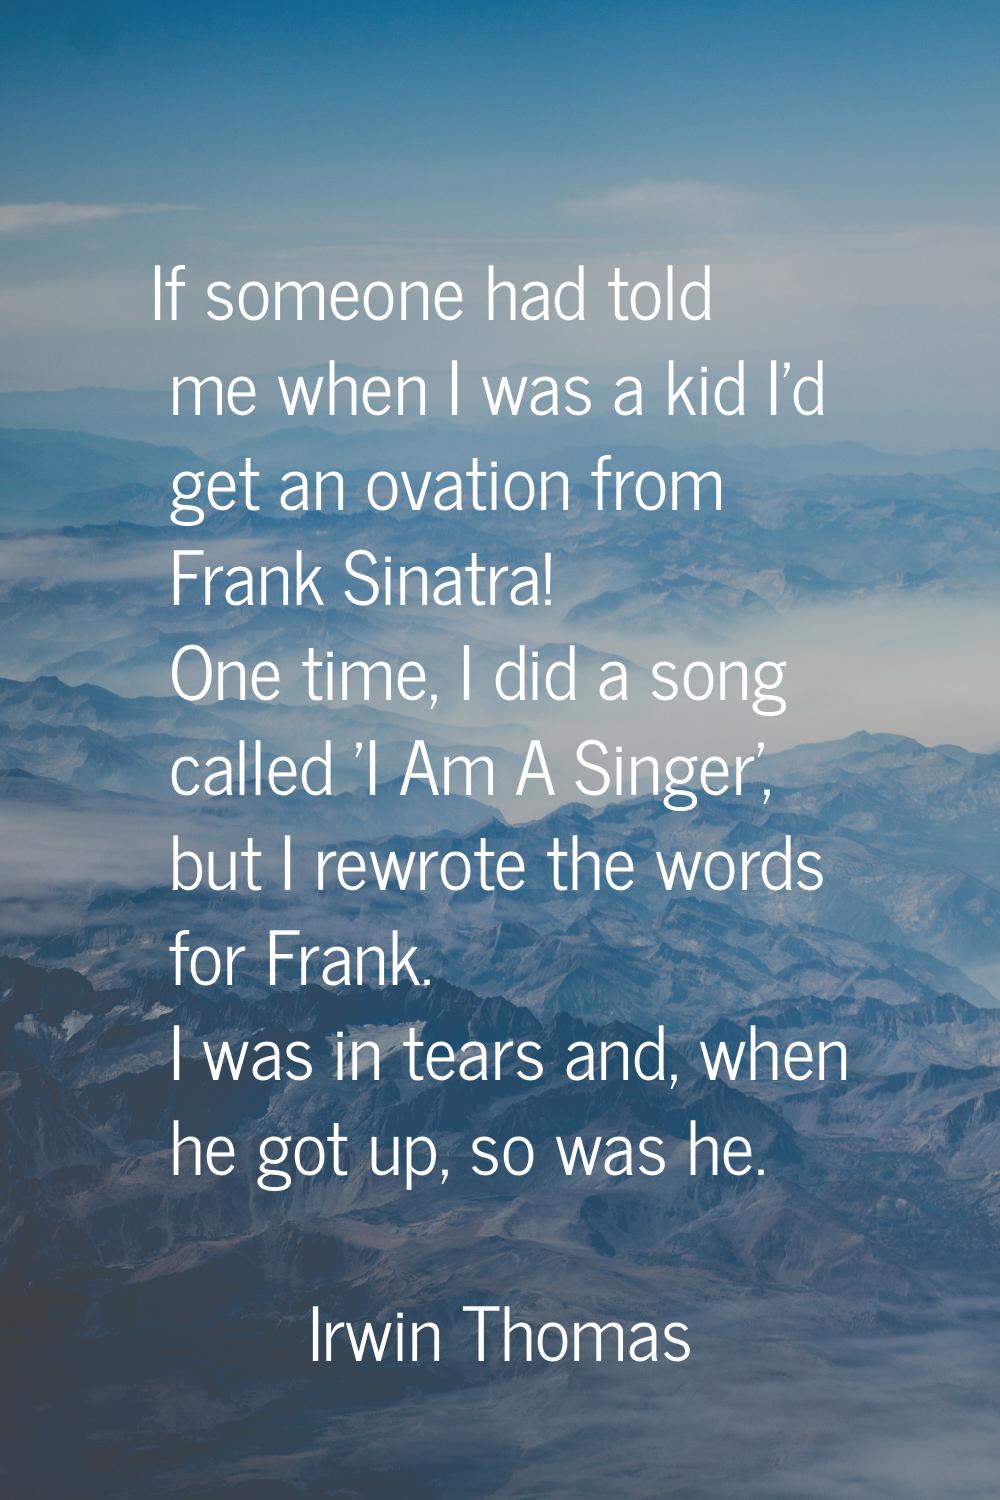 If someone had told me when I was a kid I'd get an ovation from Frank Sinatra! One time, I did a so